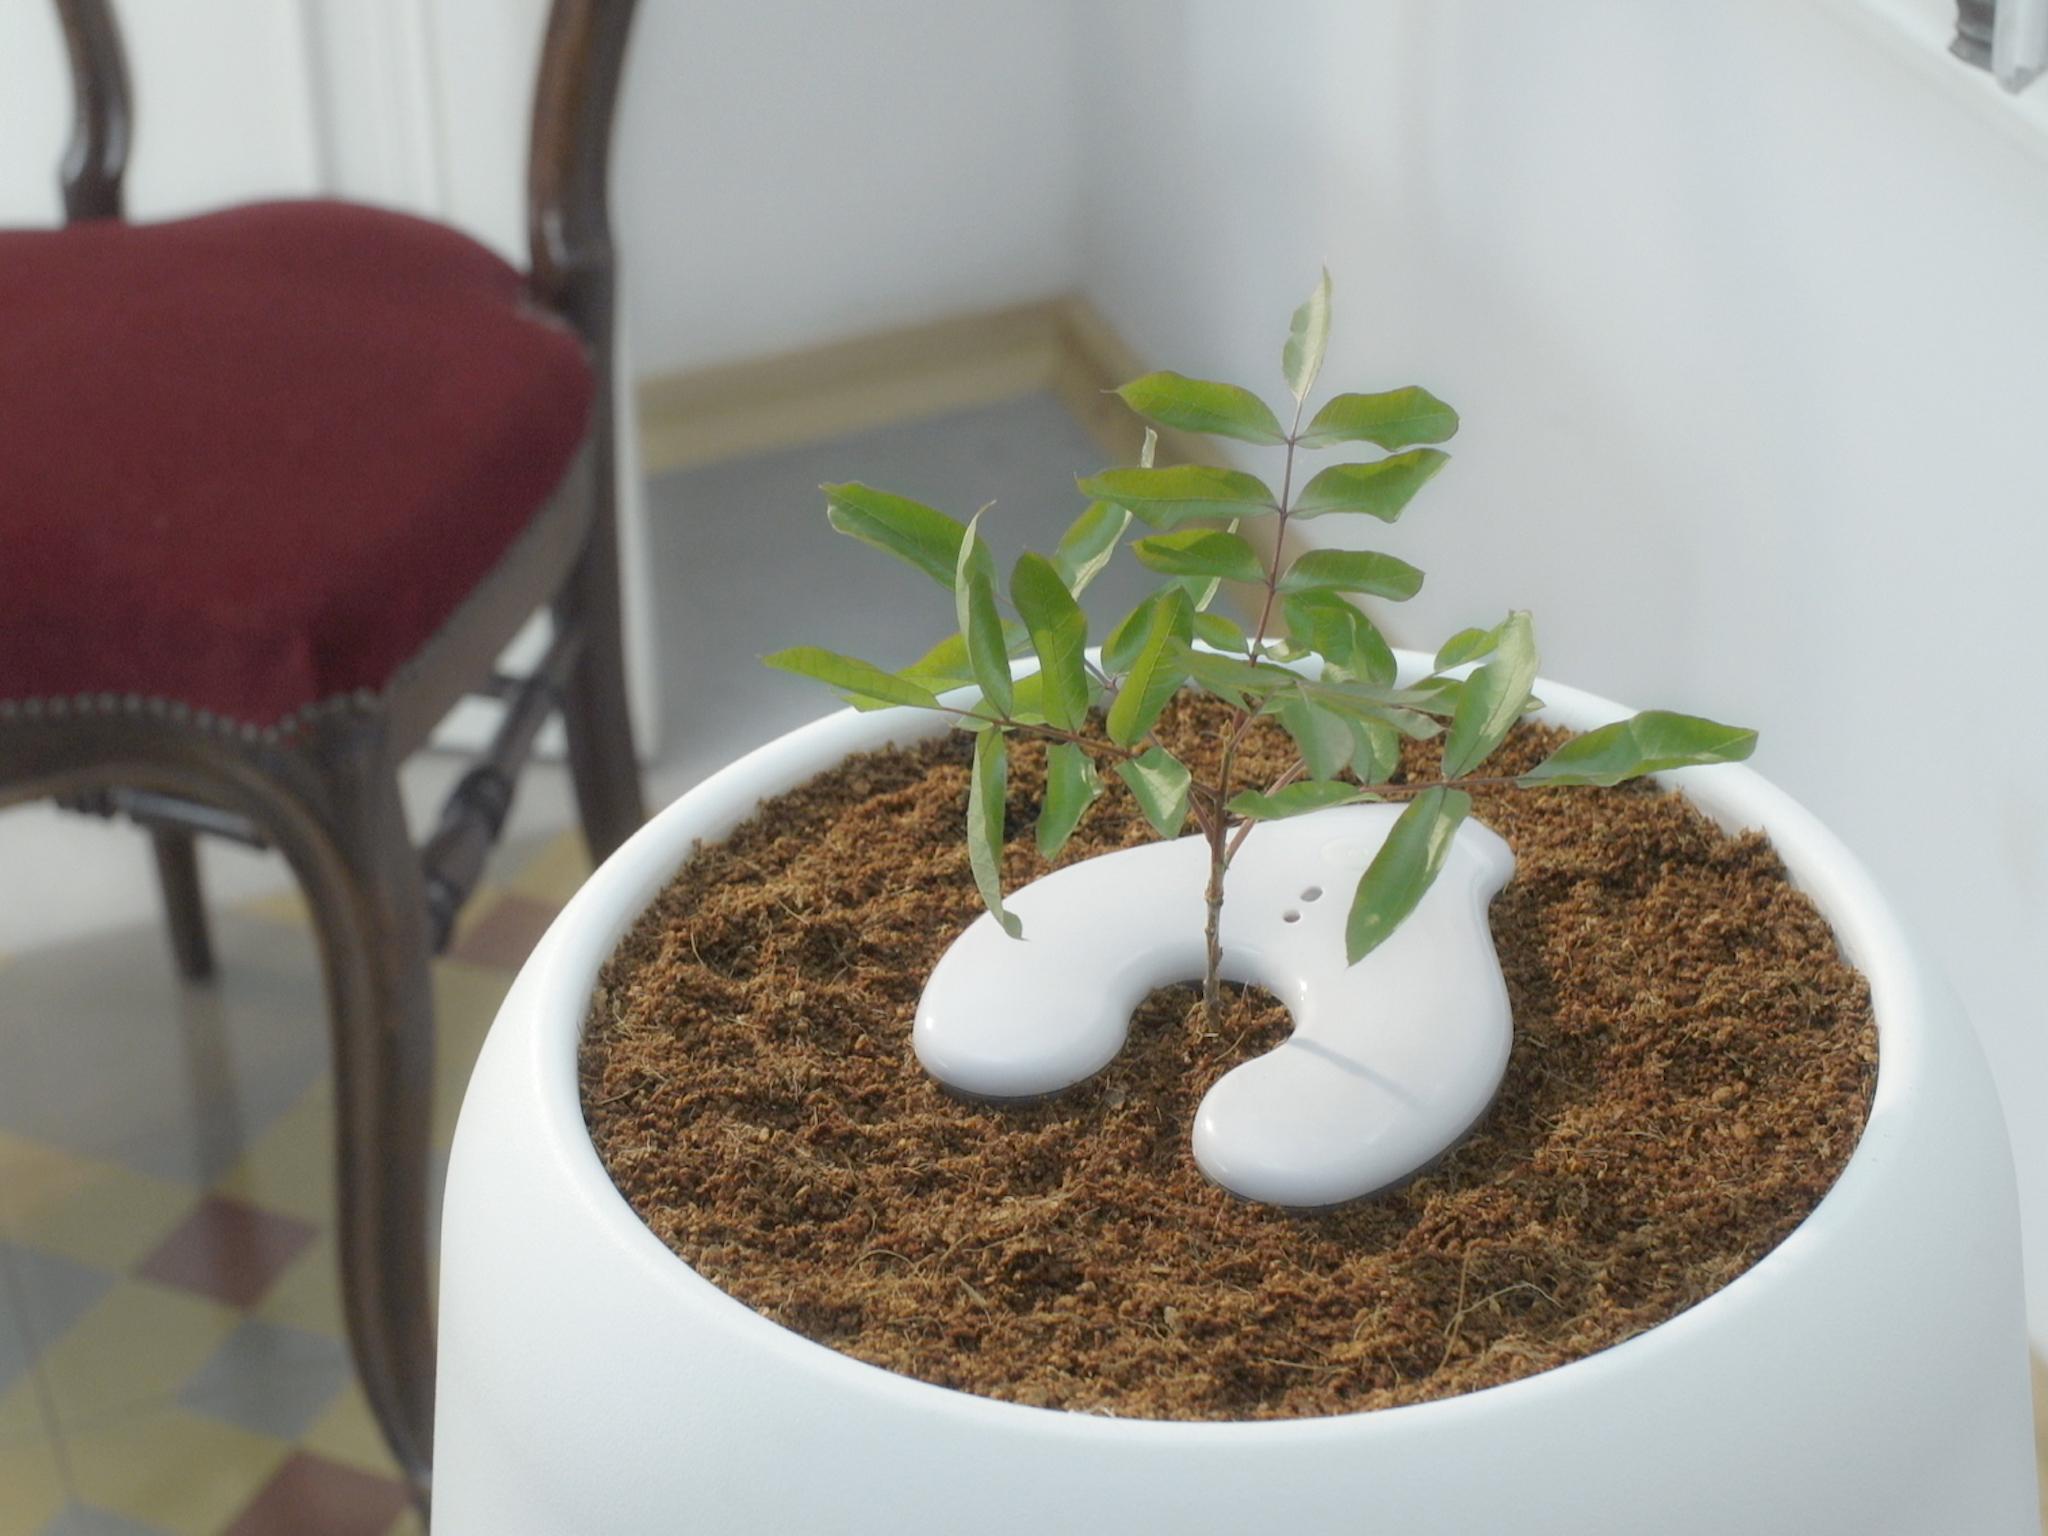 The Bios Incube is a digital incubator that helps buyers grow trees from the ashes of a loved one